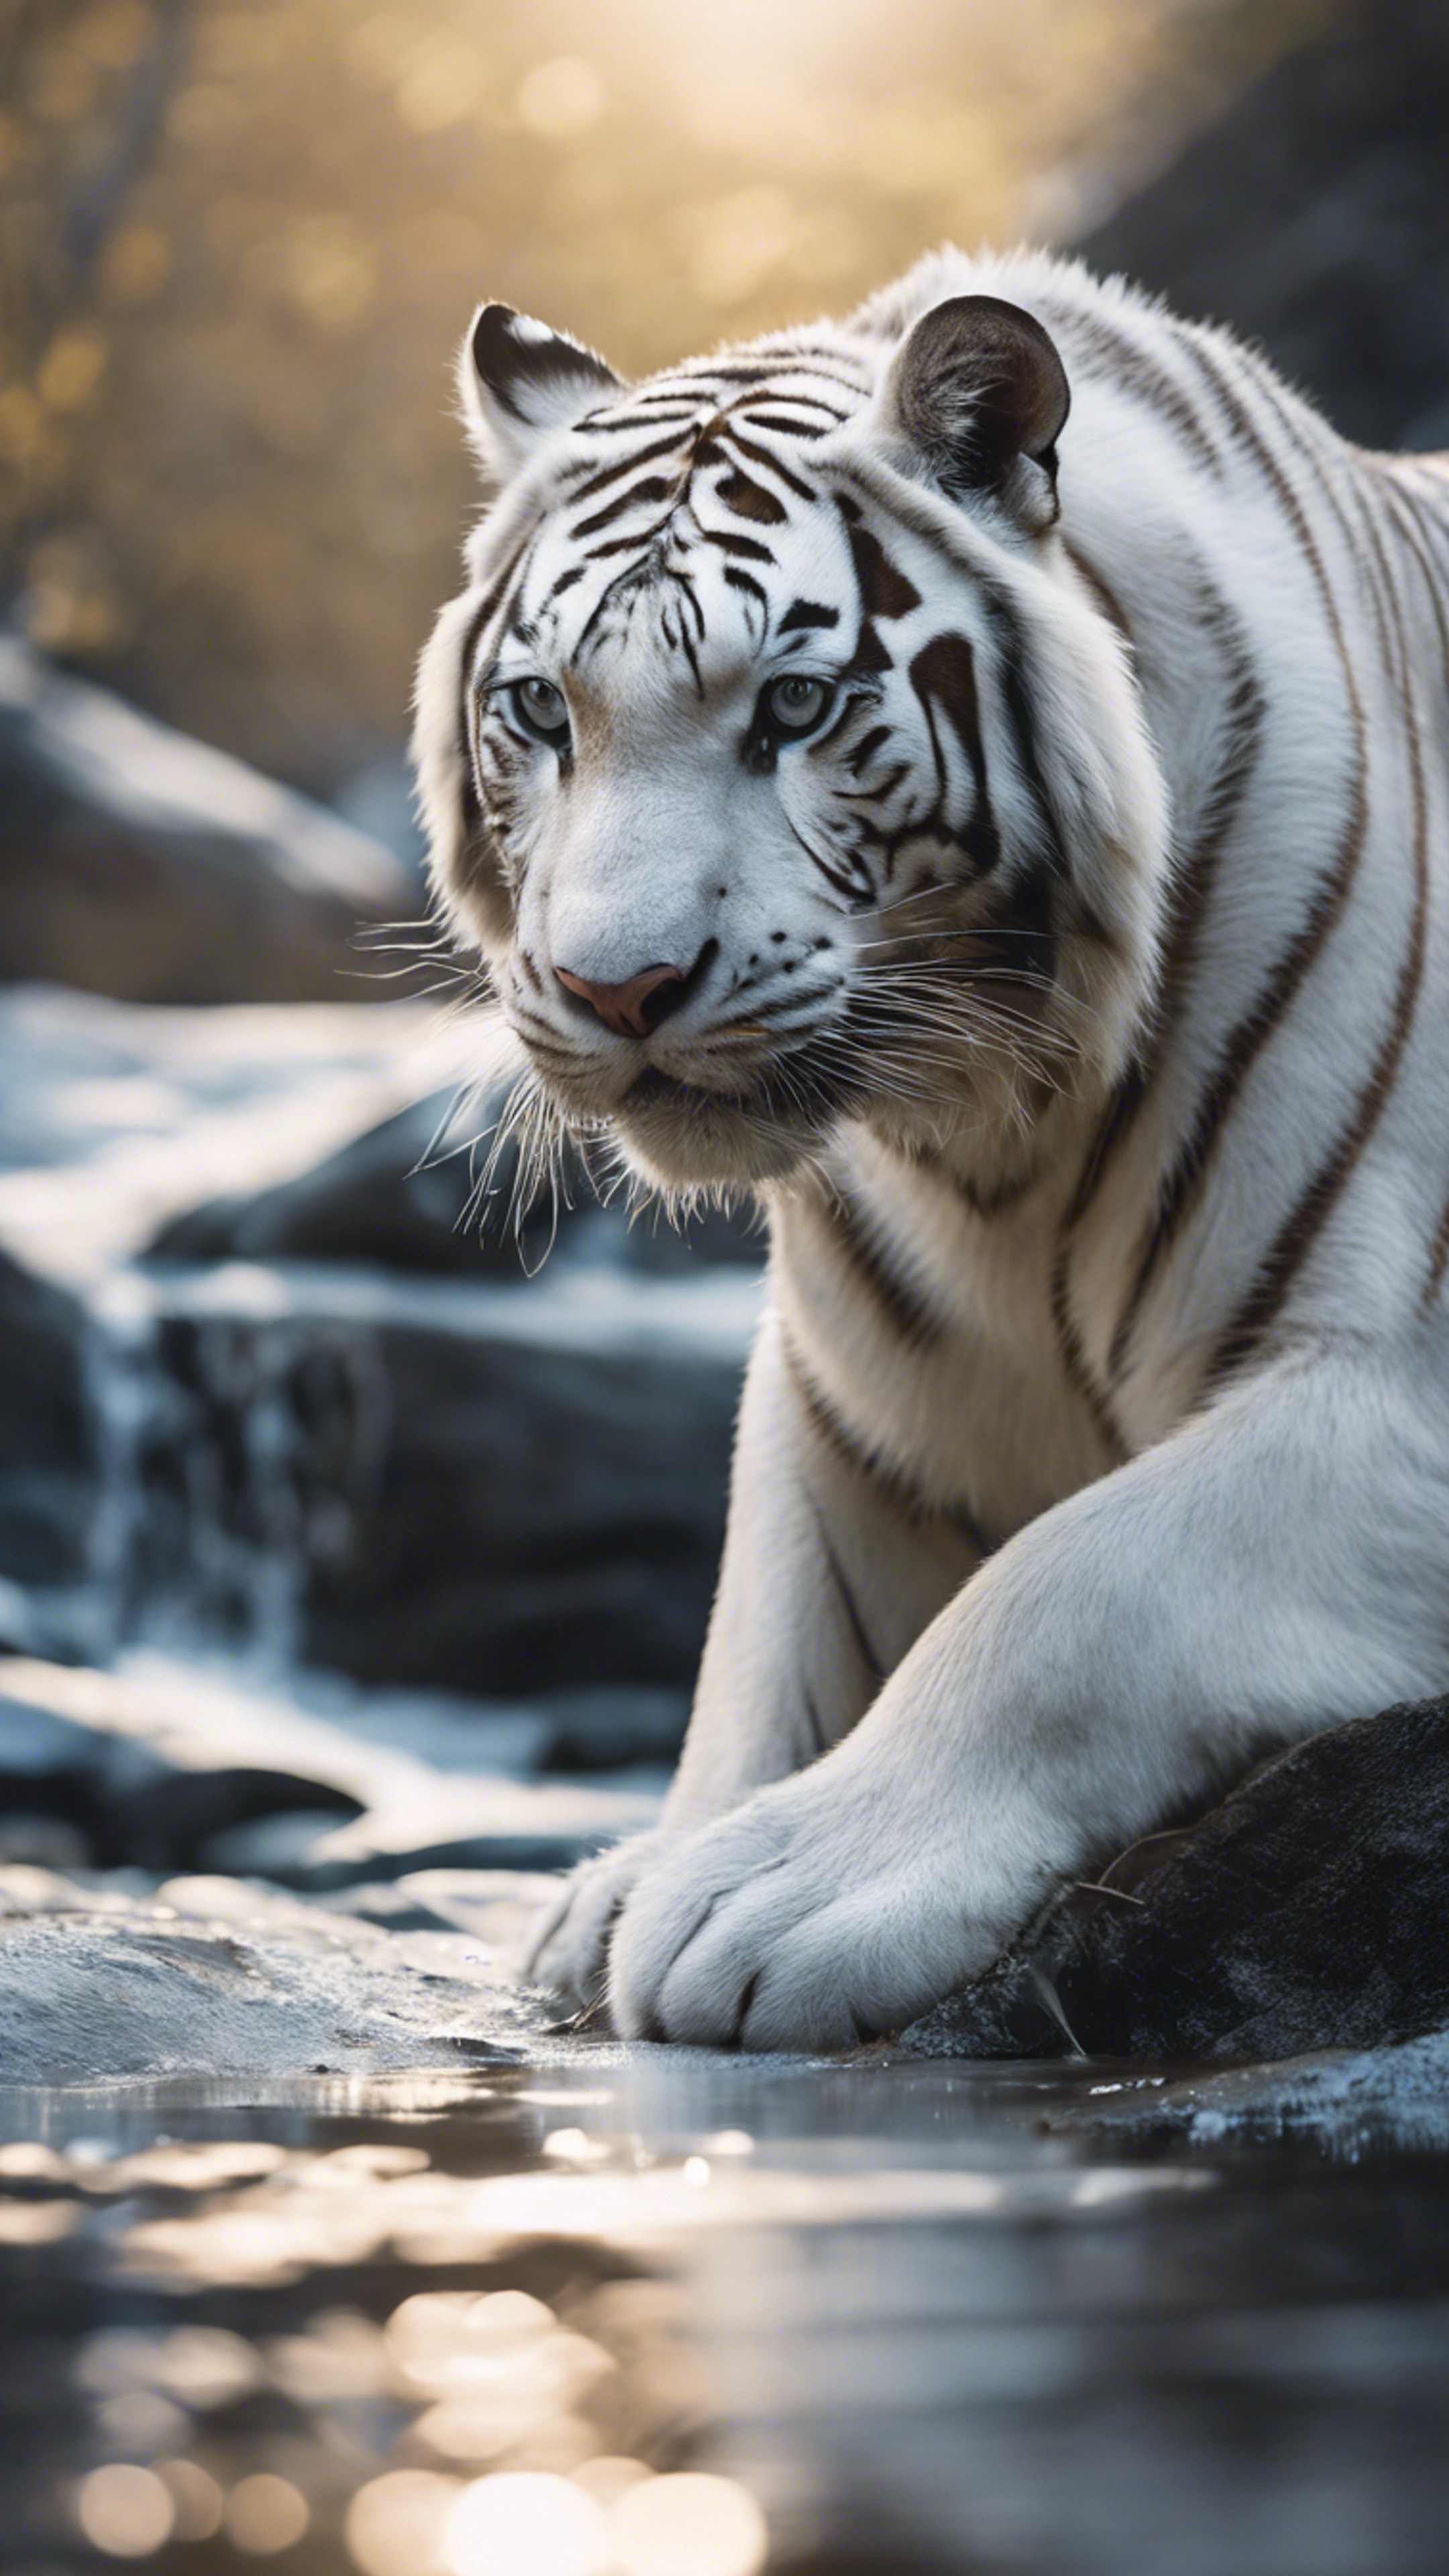 White Bengal tiger crouching near a cold mountain stream, ready to pounce壁紙[60014ca7a56b4b479206]